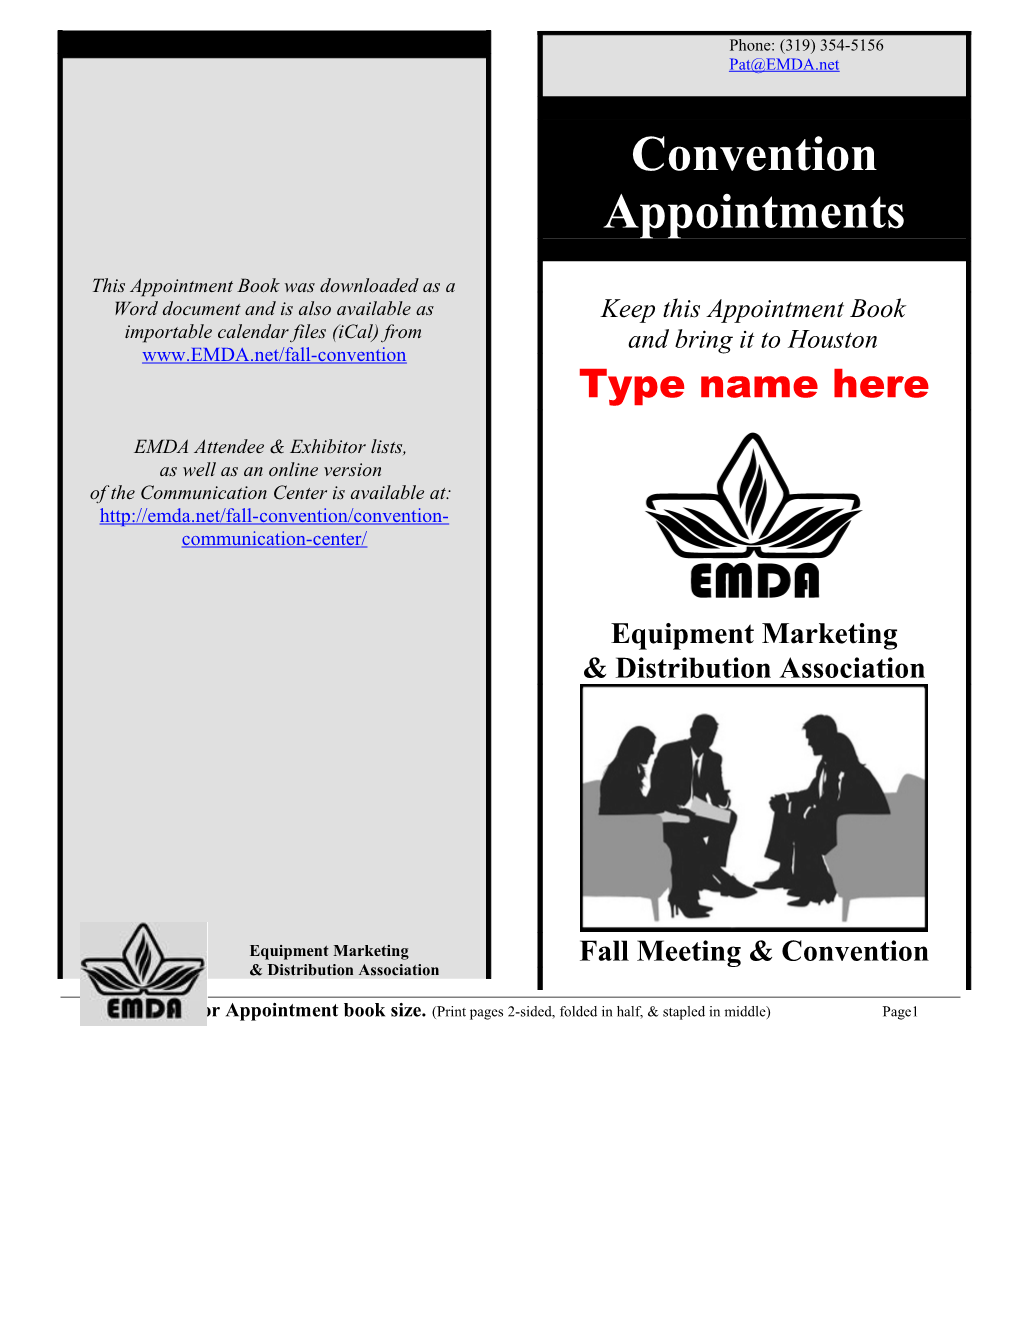 Trim Here for Appointment Book Size. (Print Pages 2-Sided, Folded in Half, & Stapled In